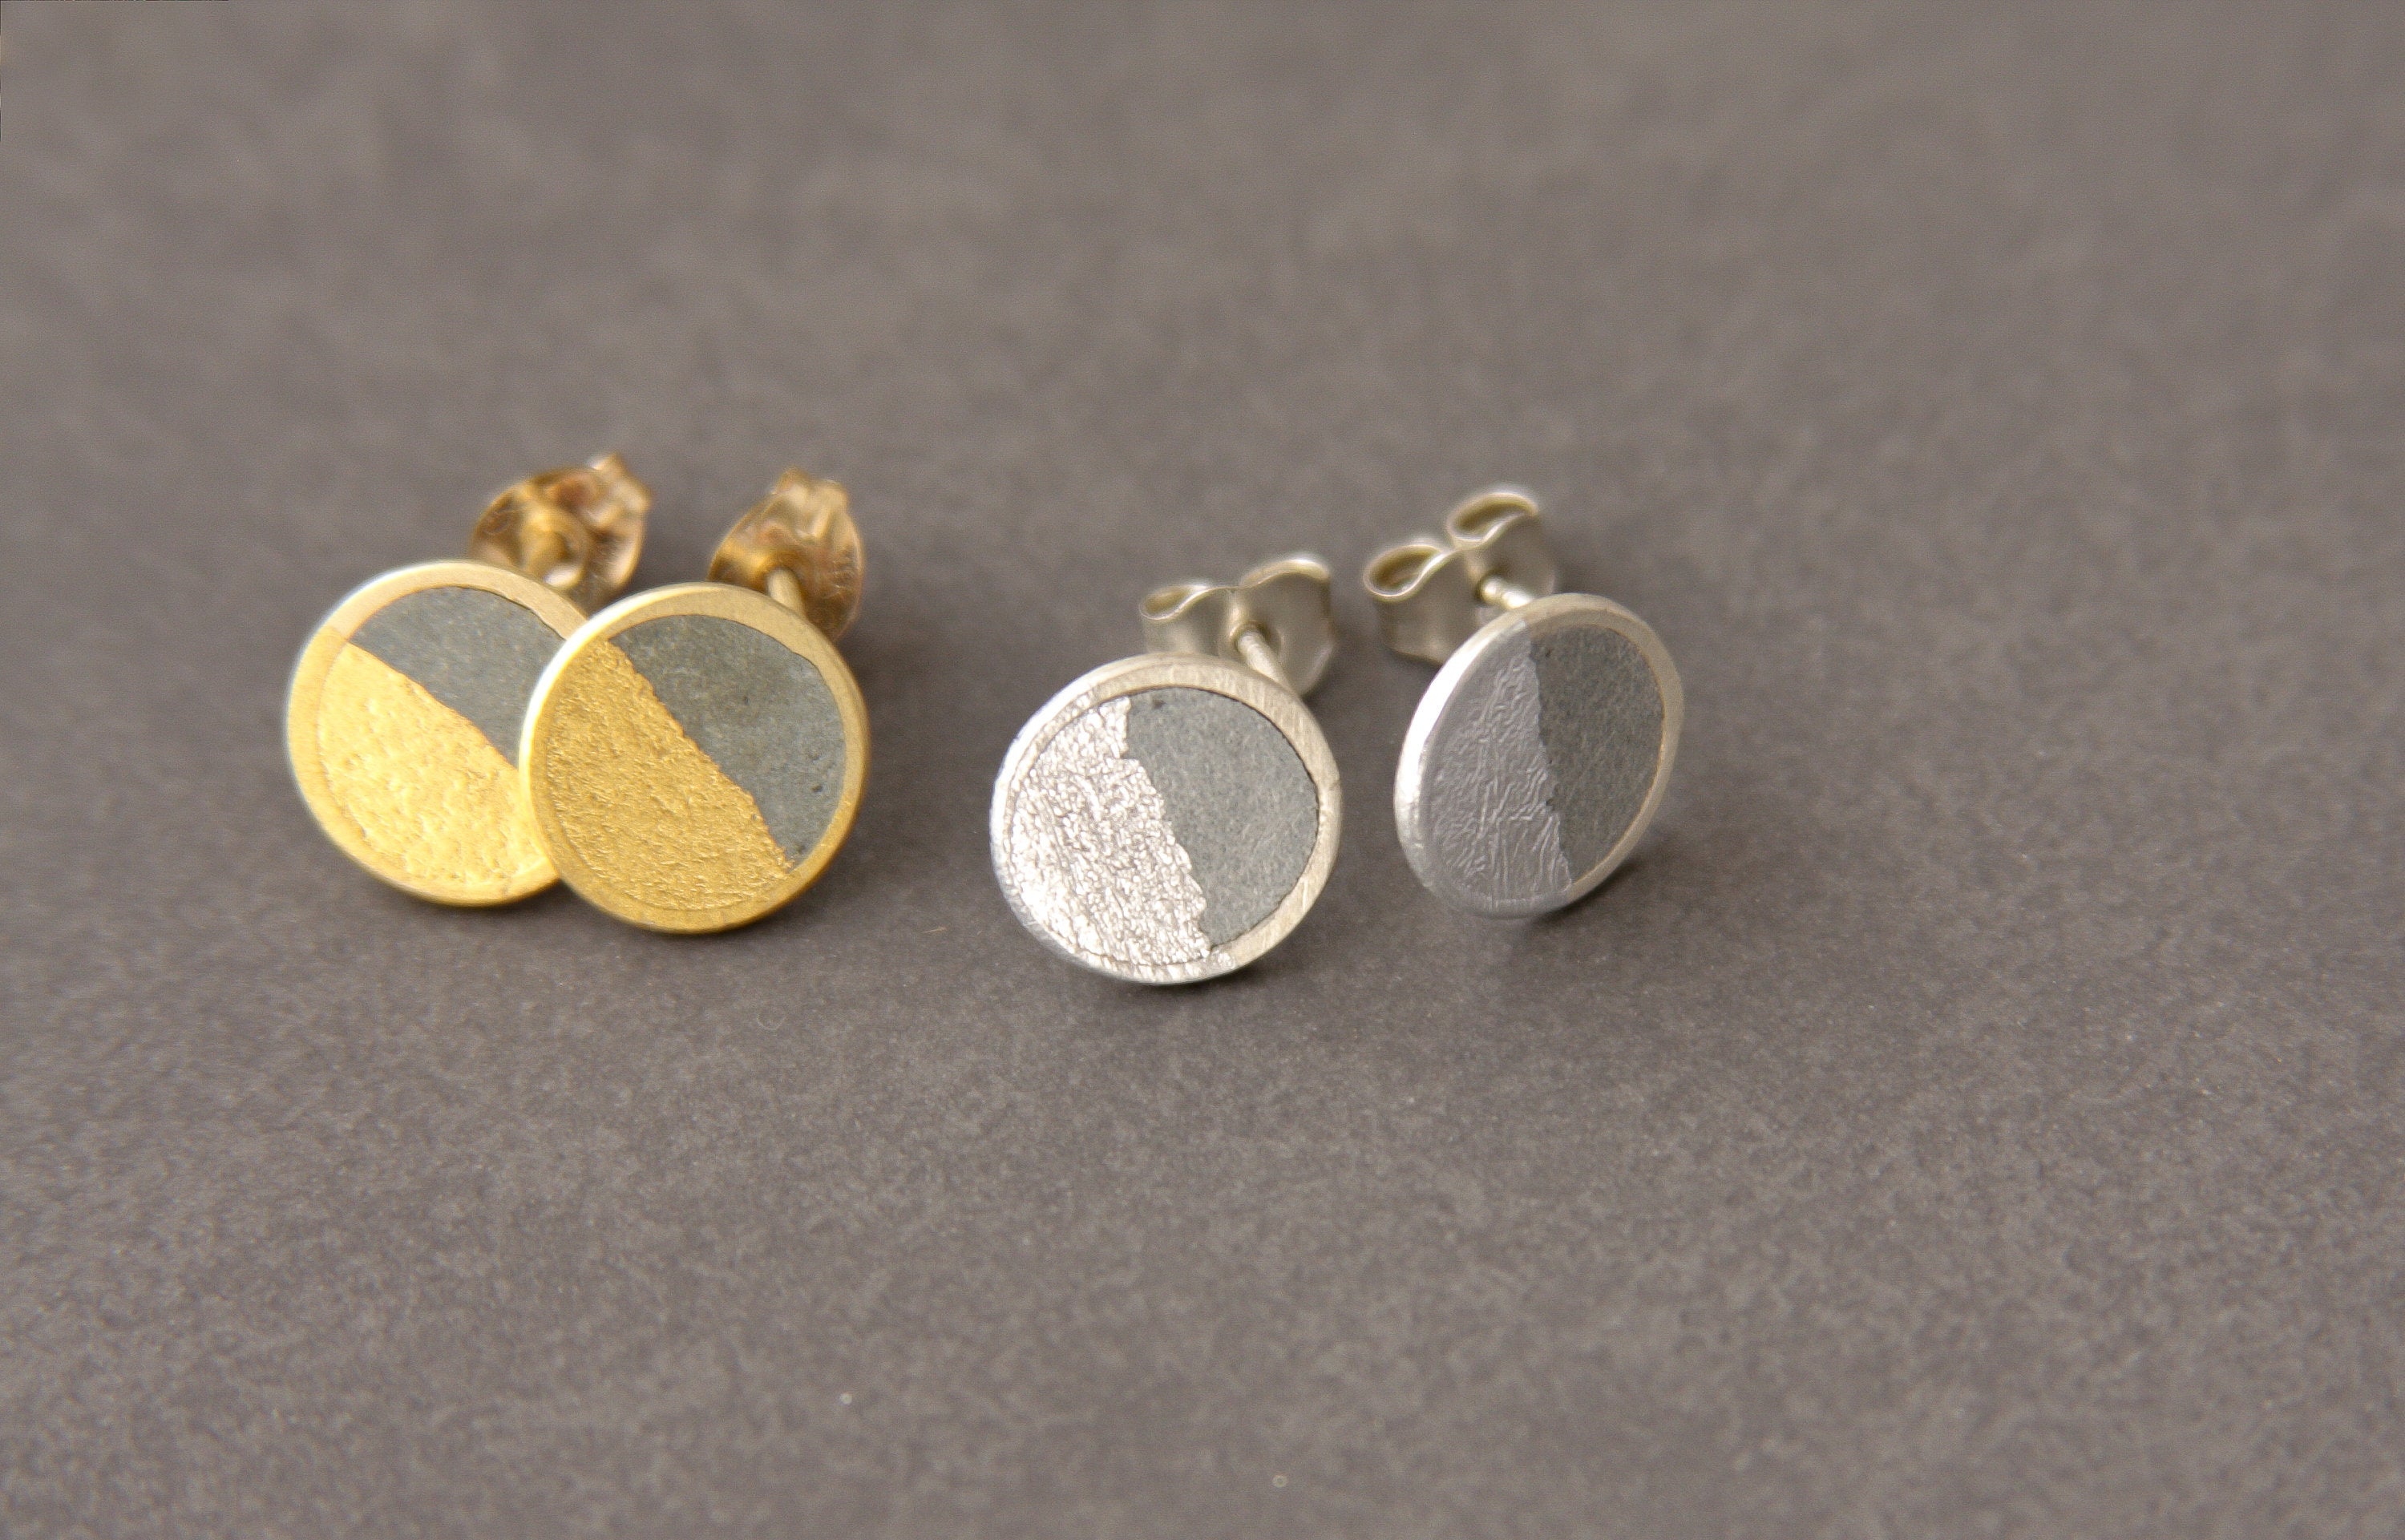 Gold Dipped Concrete Post Earrings, Round Flat Earrings Studs - hs